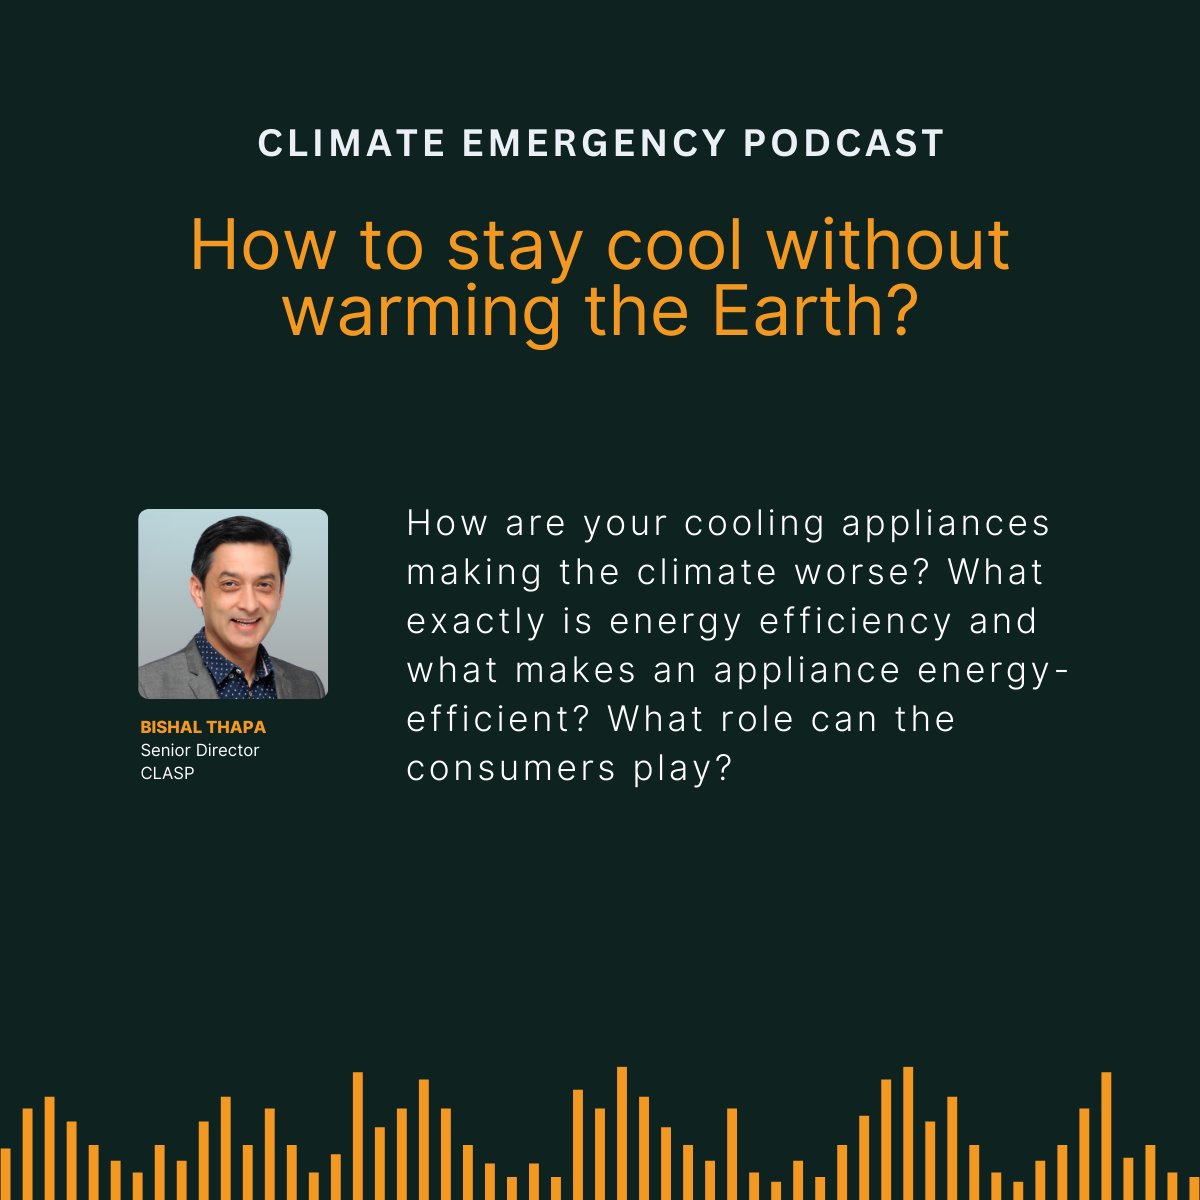 With temperatures soaring globally & demand for cooling on the rise, CLASP’s @BishalThapa5 speaks with @RichhariyaSneha on the pivotal role of energy efficiency in cooling appliances. Tune into @SunoIndia_in's Climate Emergency podcast 👉 sunoindia.in/climate-emerge…